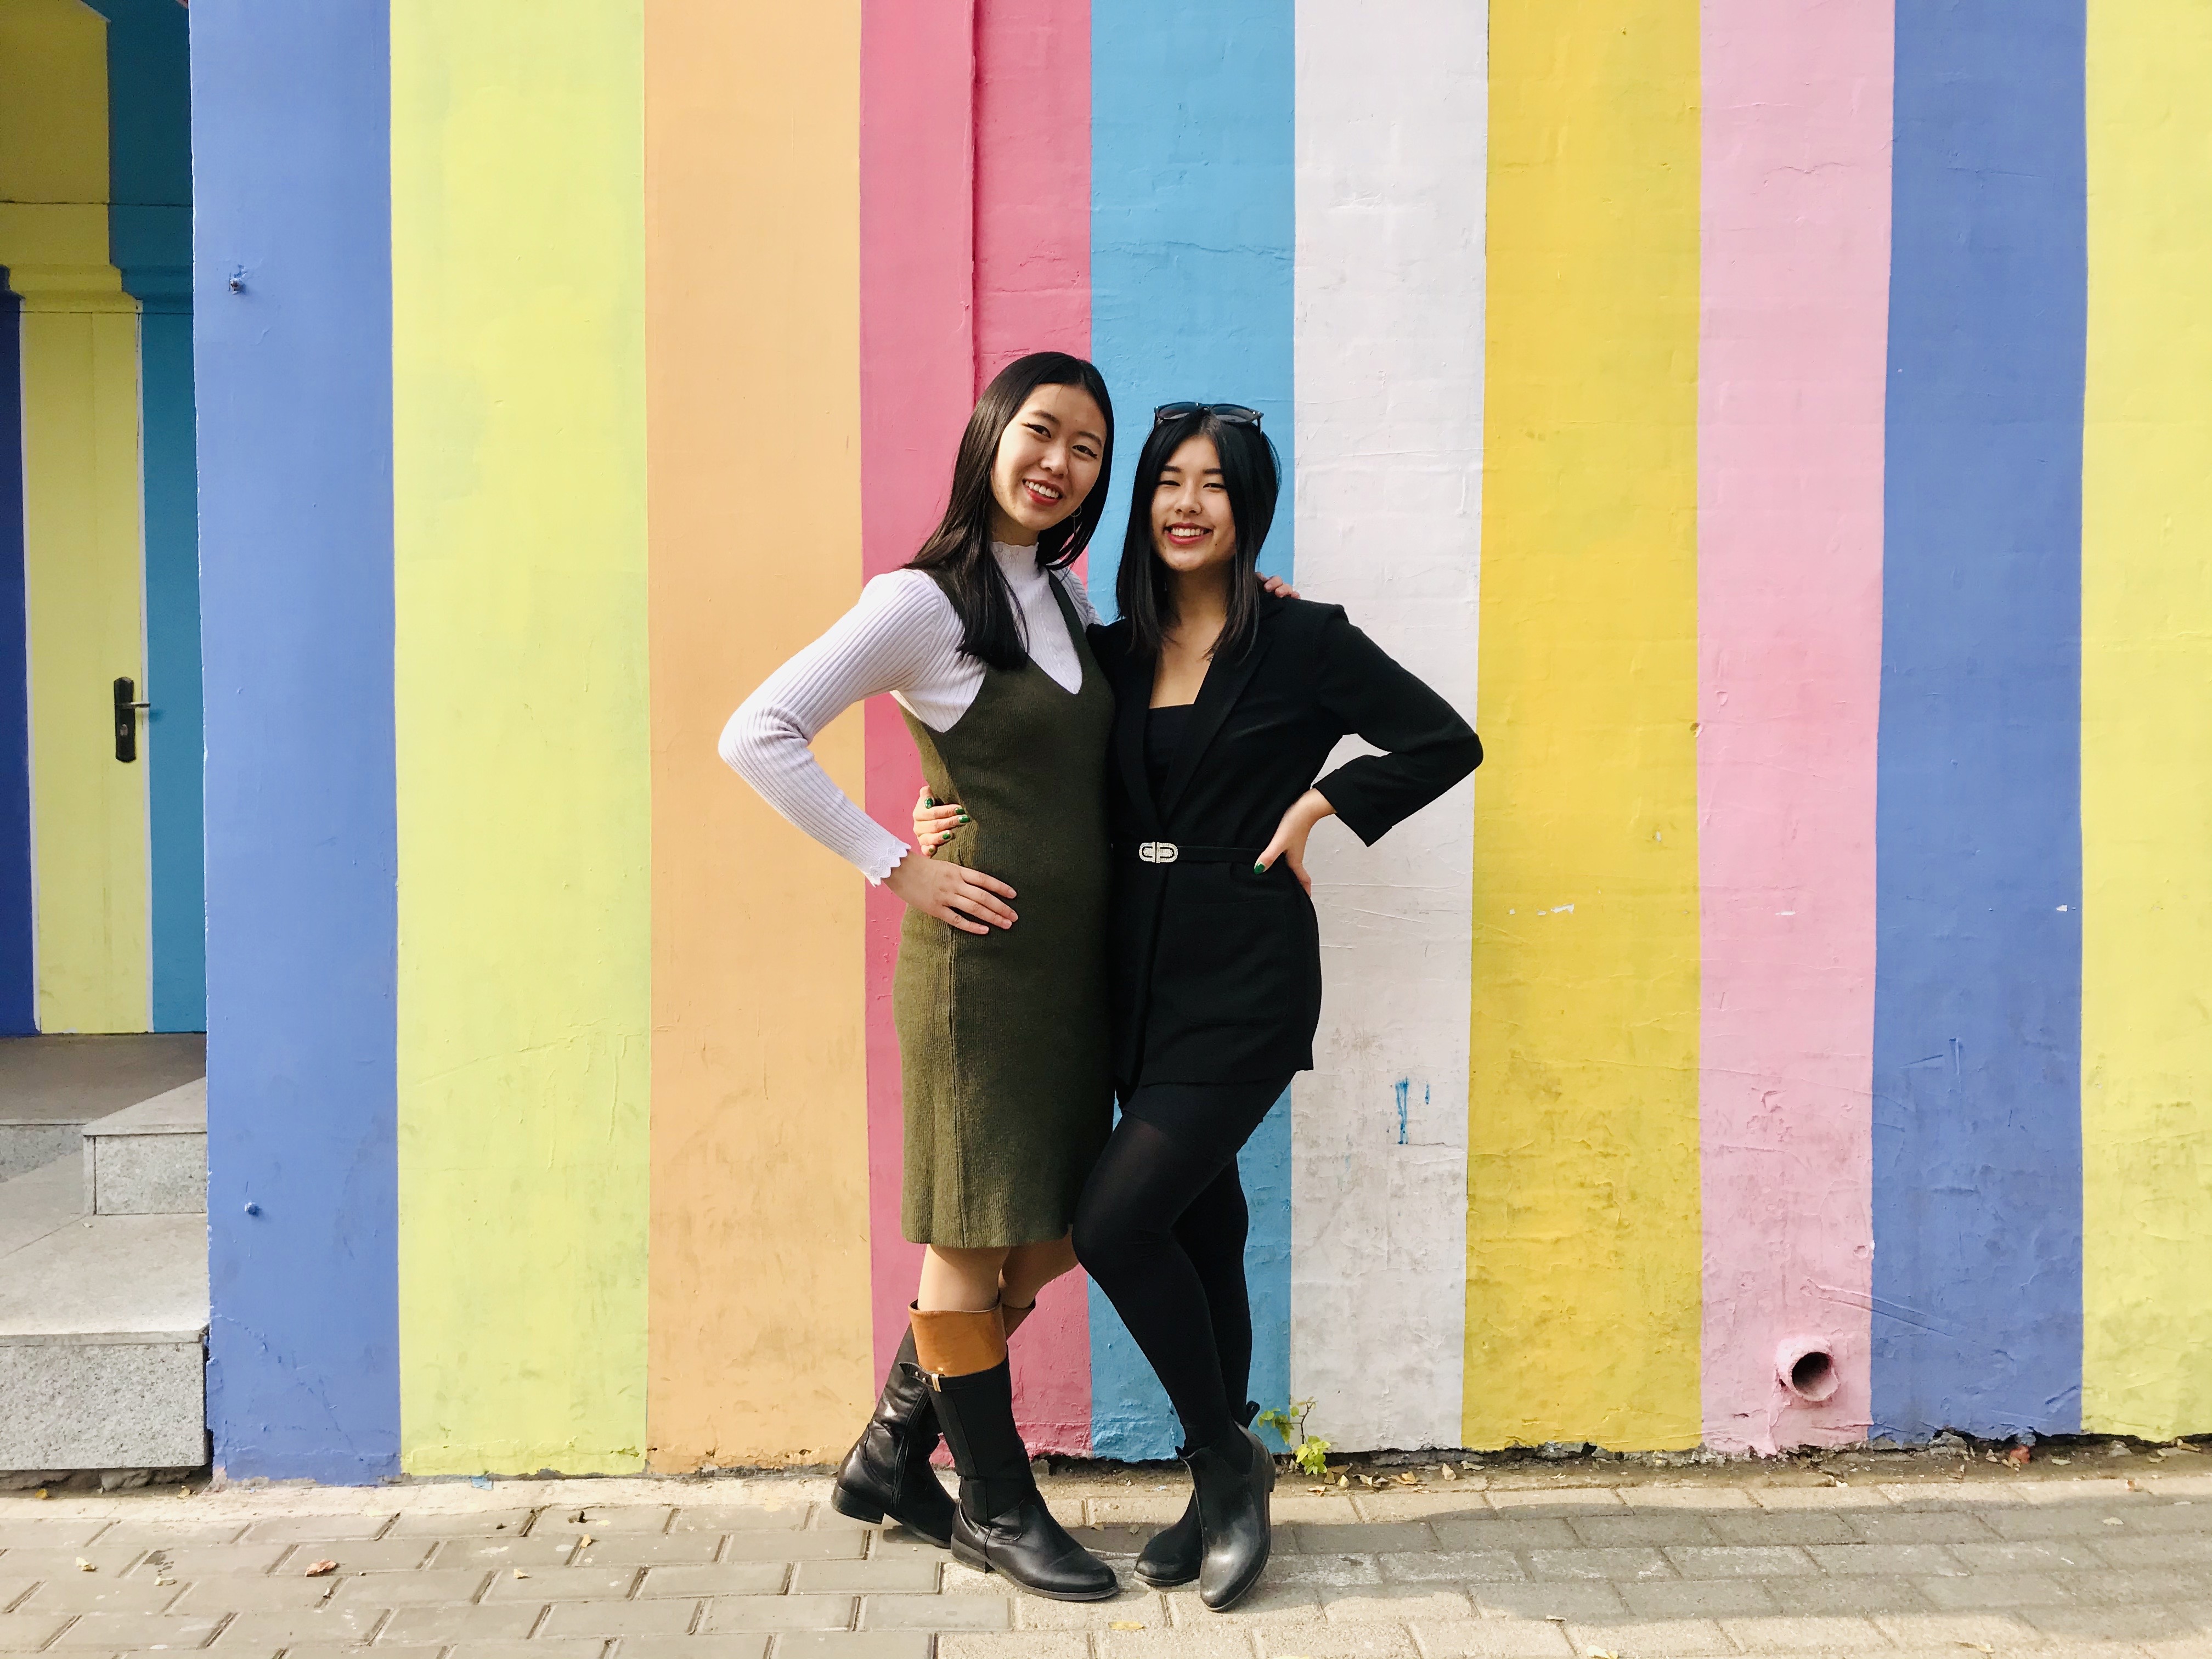 Sarah and I in front of a colorful wall